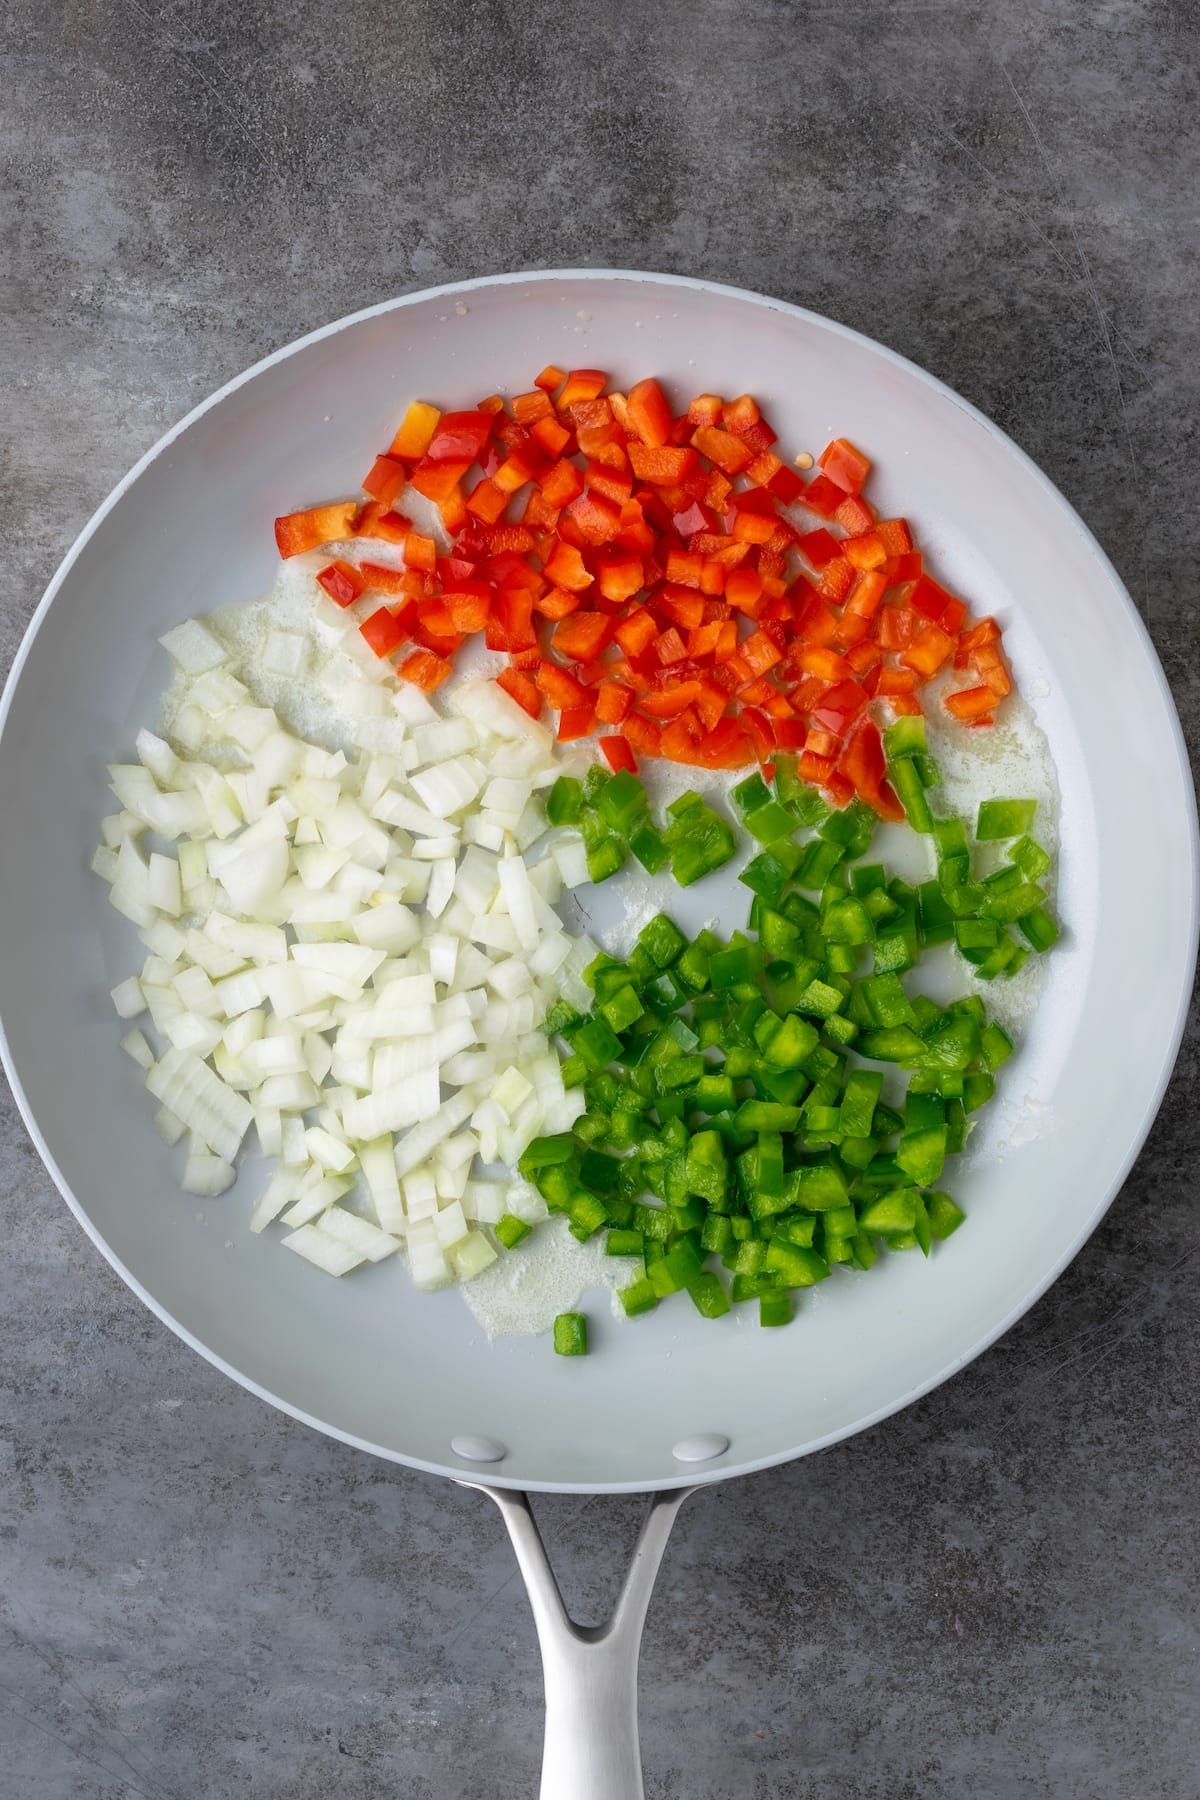 Diced onions and peppers in a skillet